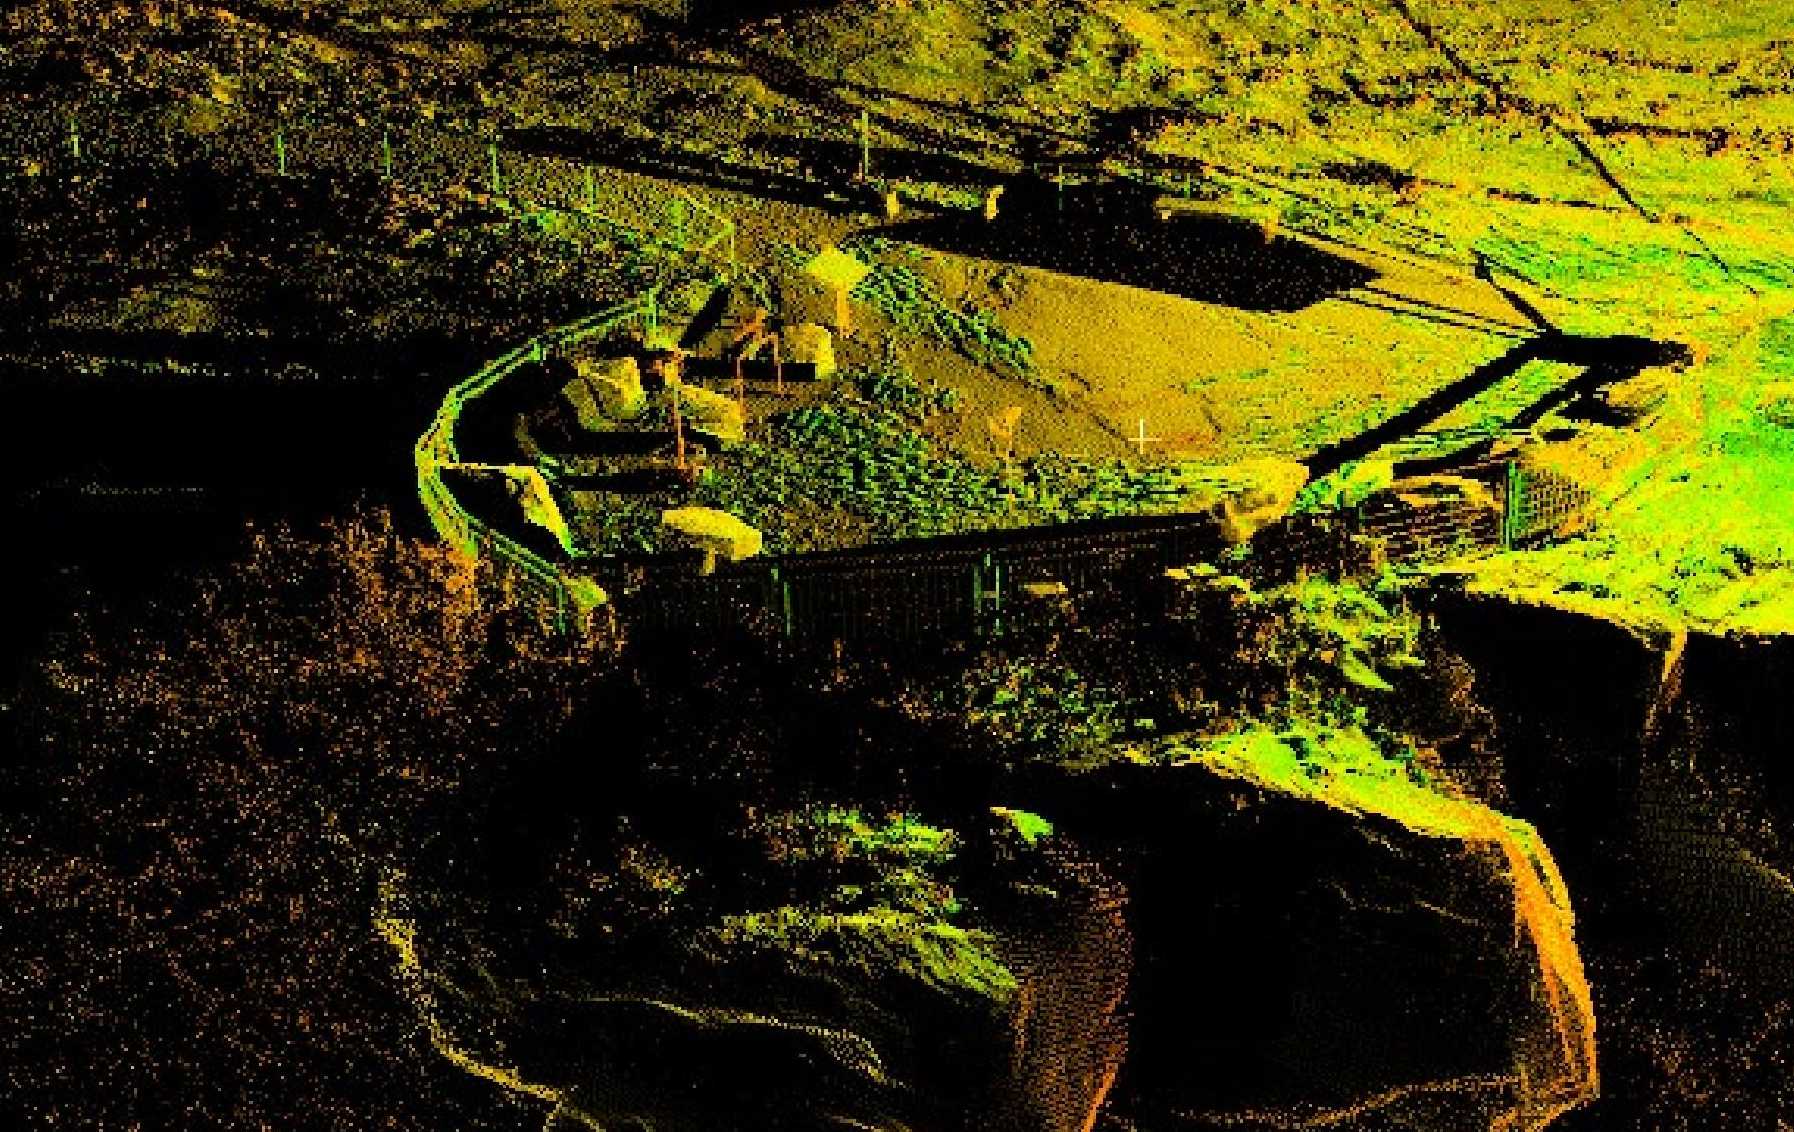 Registered and processed laser scanning data from SAIT at Head-Smashed-In Buffalo Jump